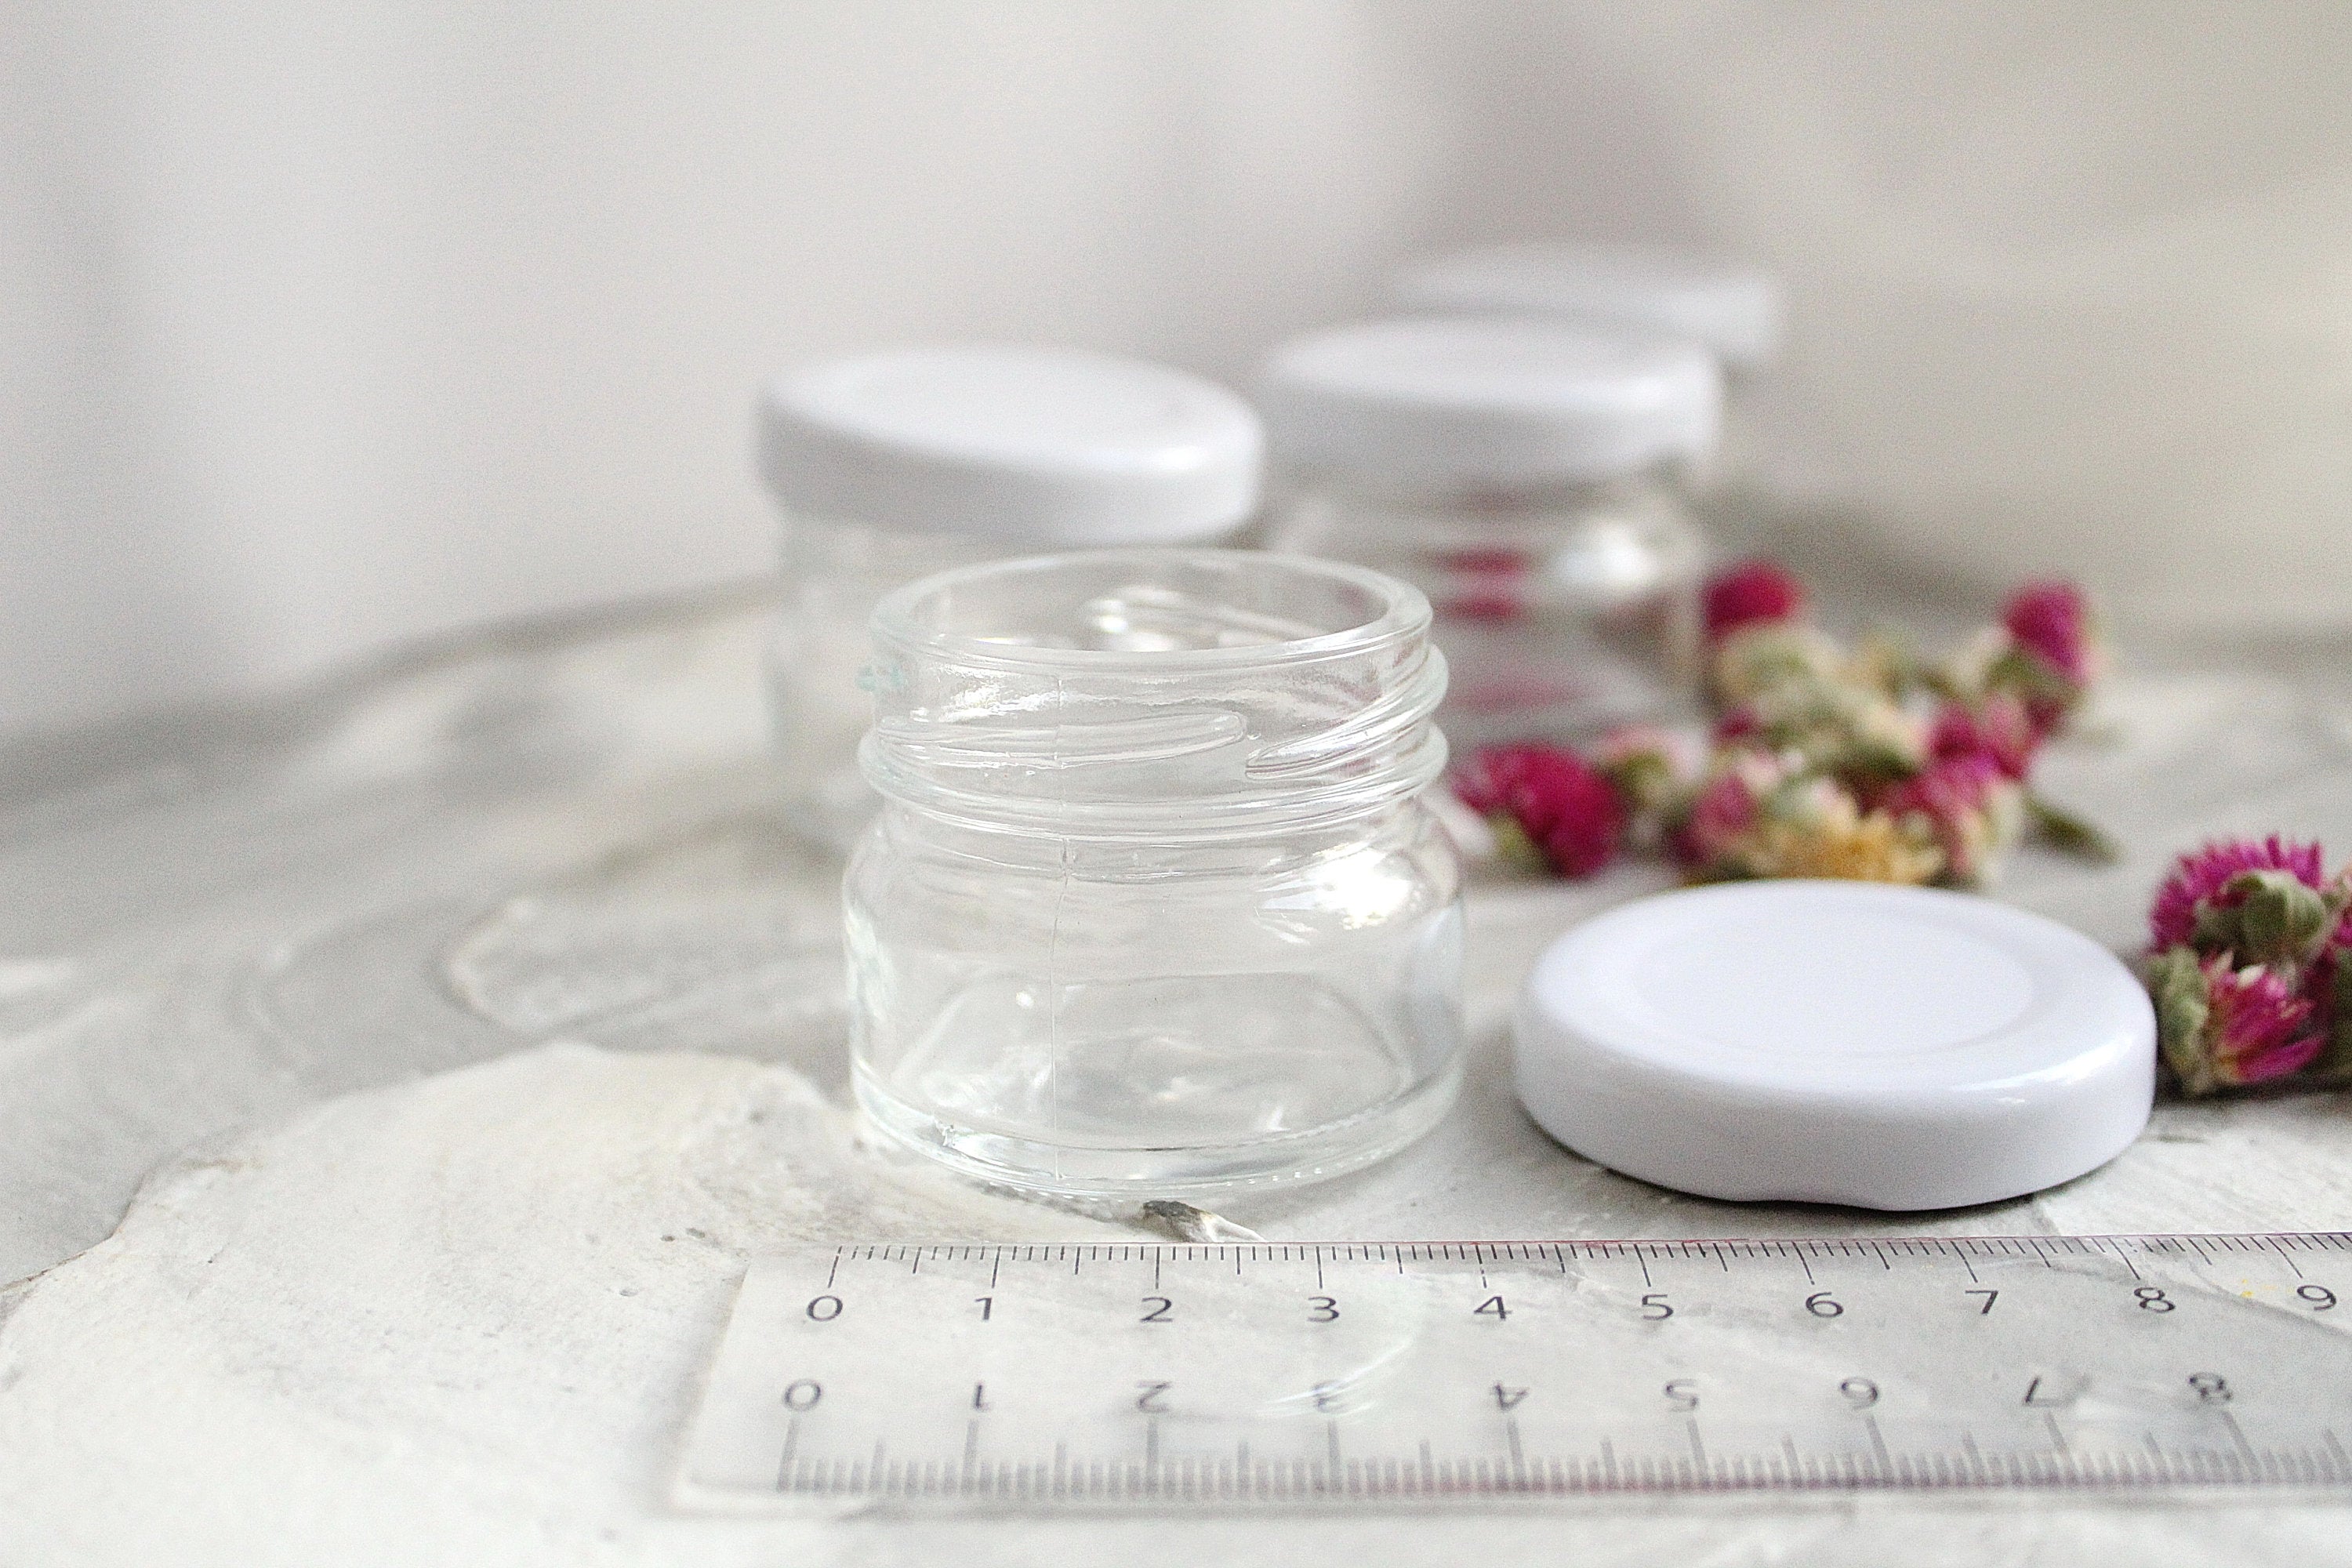 1 oz (30ml) Glass Jar, Customizable Lid, Free of BPA, Plastisol lined, Glass Jar with Lid, Kitchen Glass Jars, Glass Jars for Spices